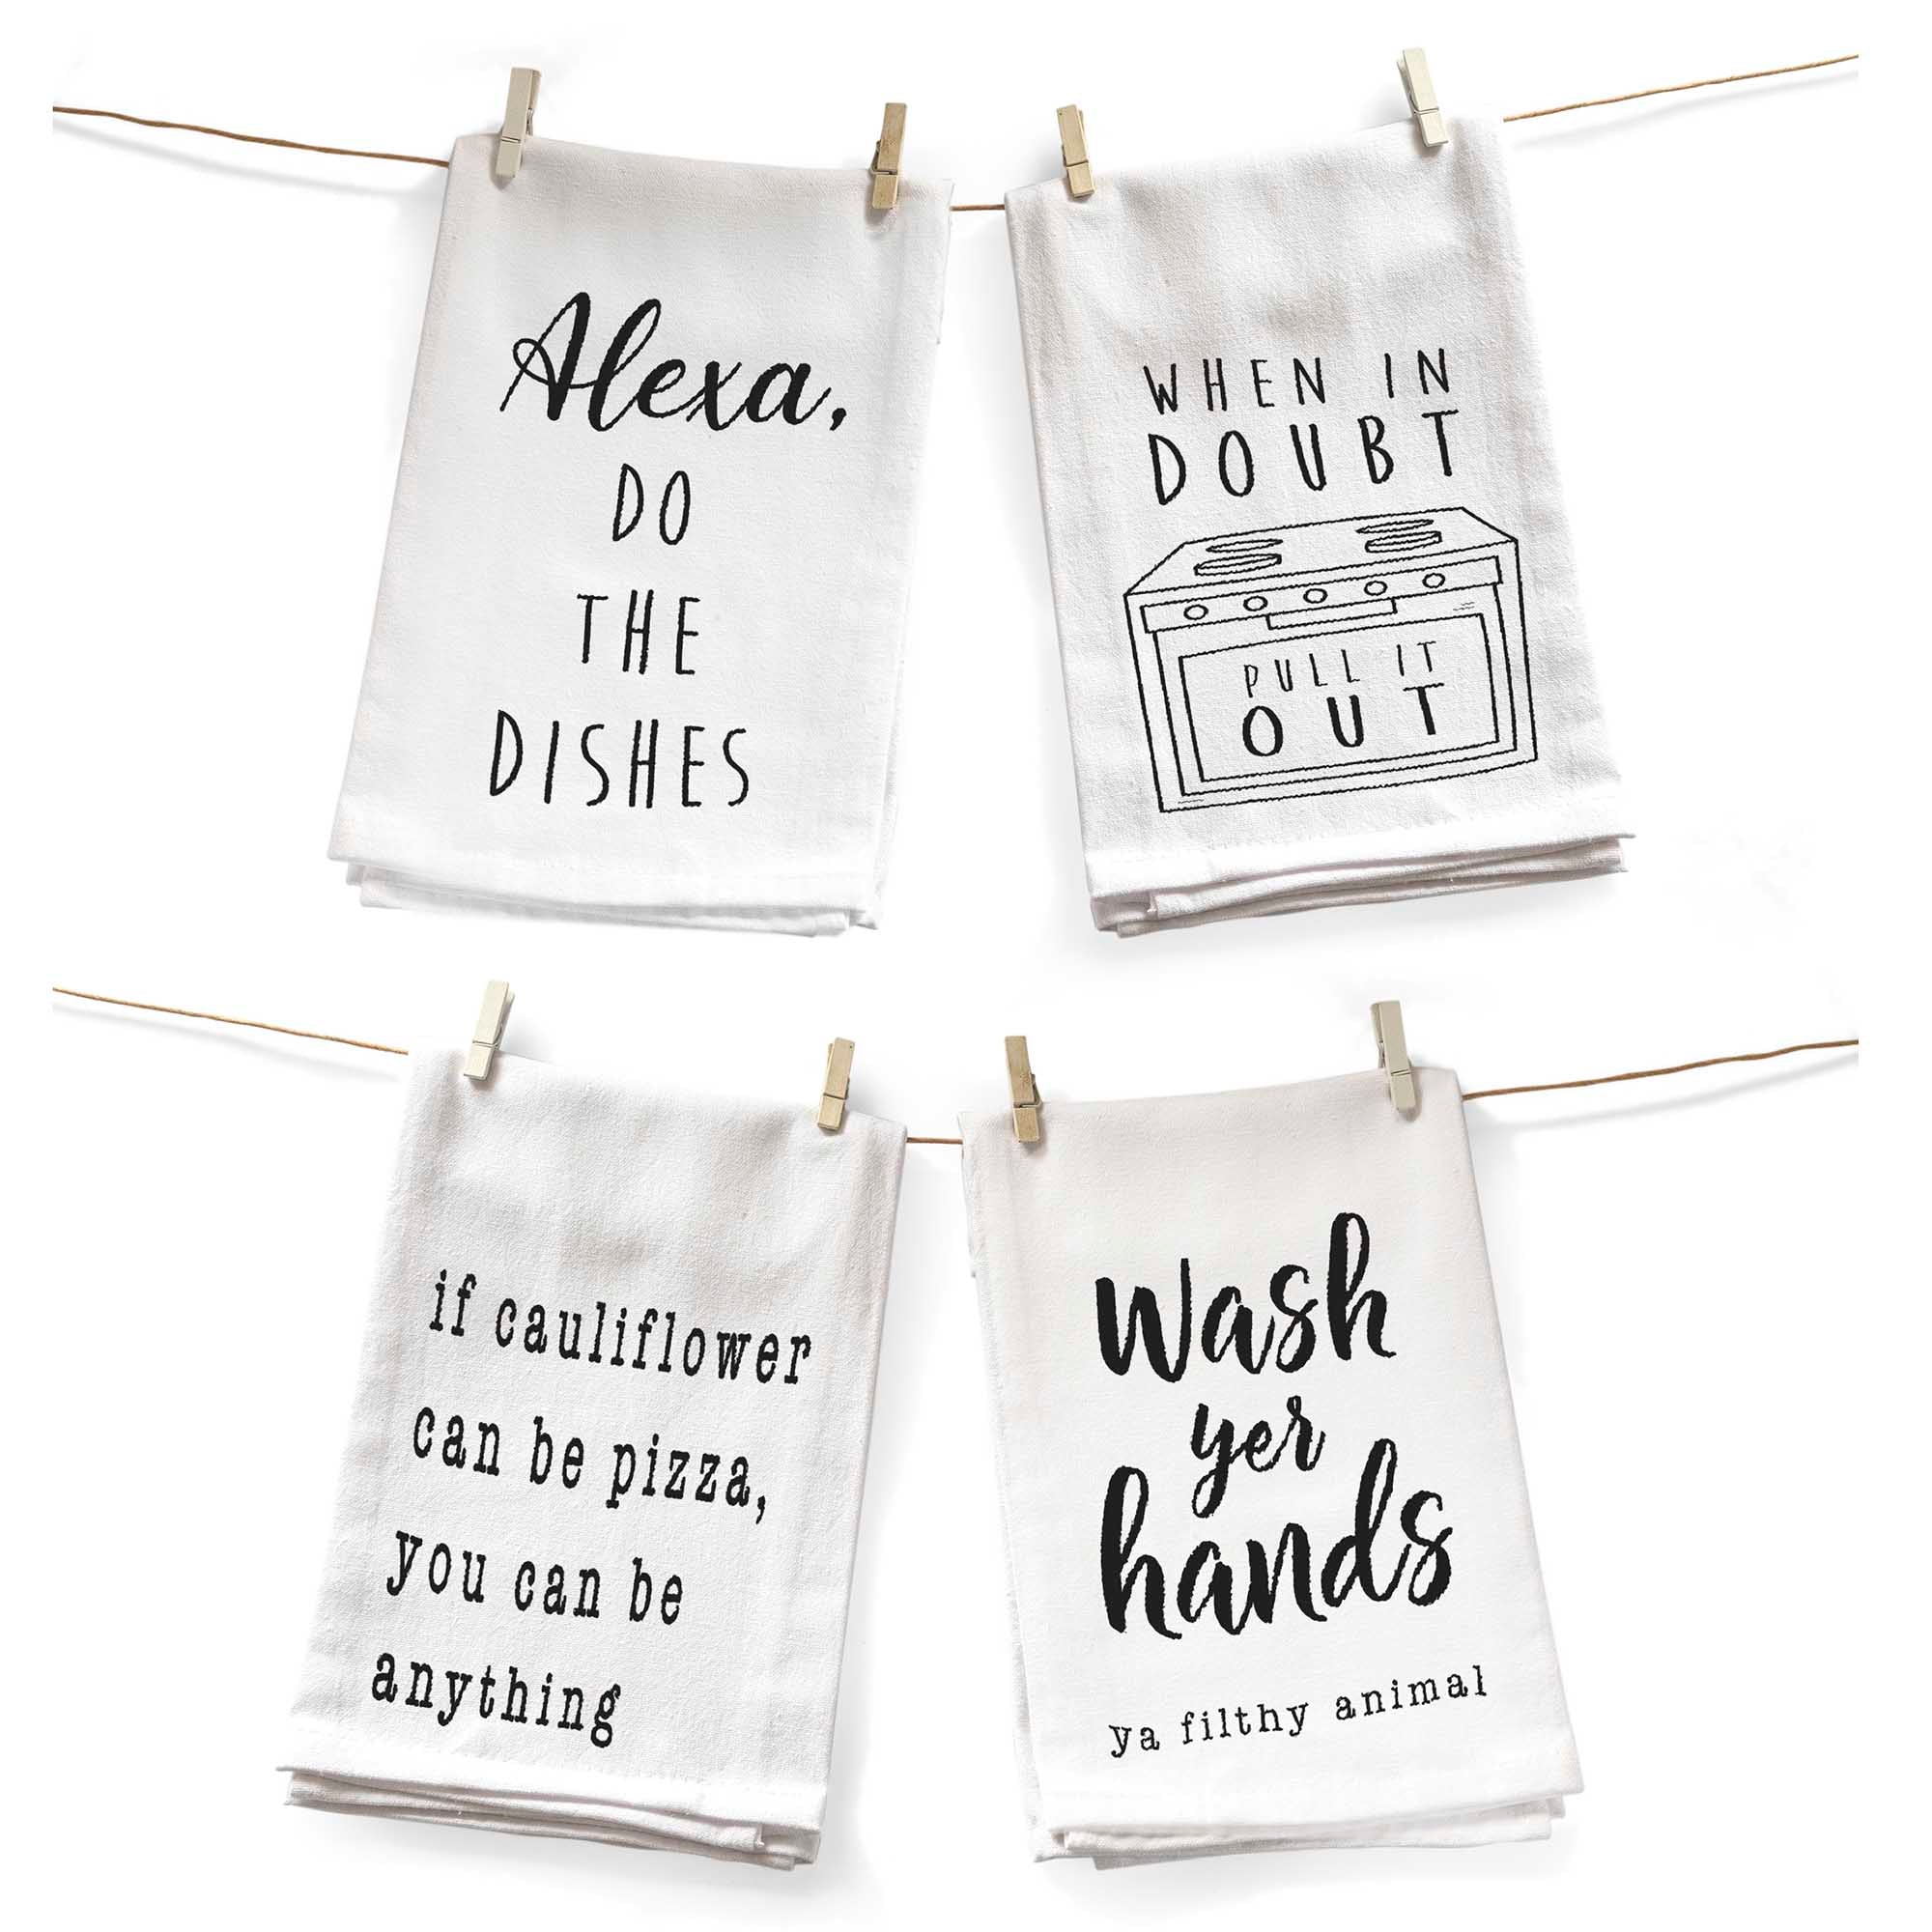 MAINEVENT Funny Kitchen Towel 4 Pack 18x24 Inch, Set of 4 Cute Kitchen  Towel, Funny Dish Towel Saying, Funny Housewarming Gift Funny Hand Towel  Alexa